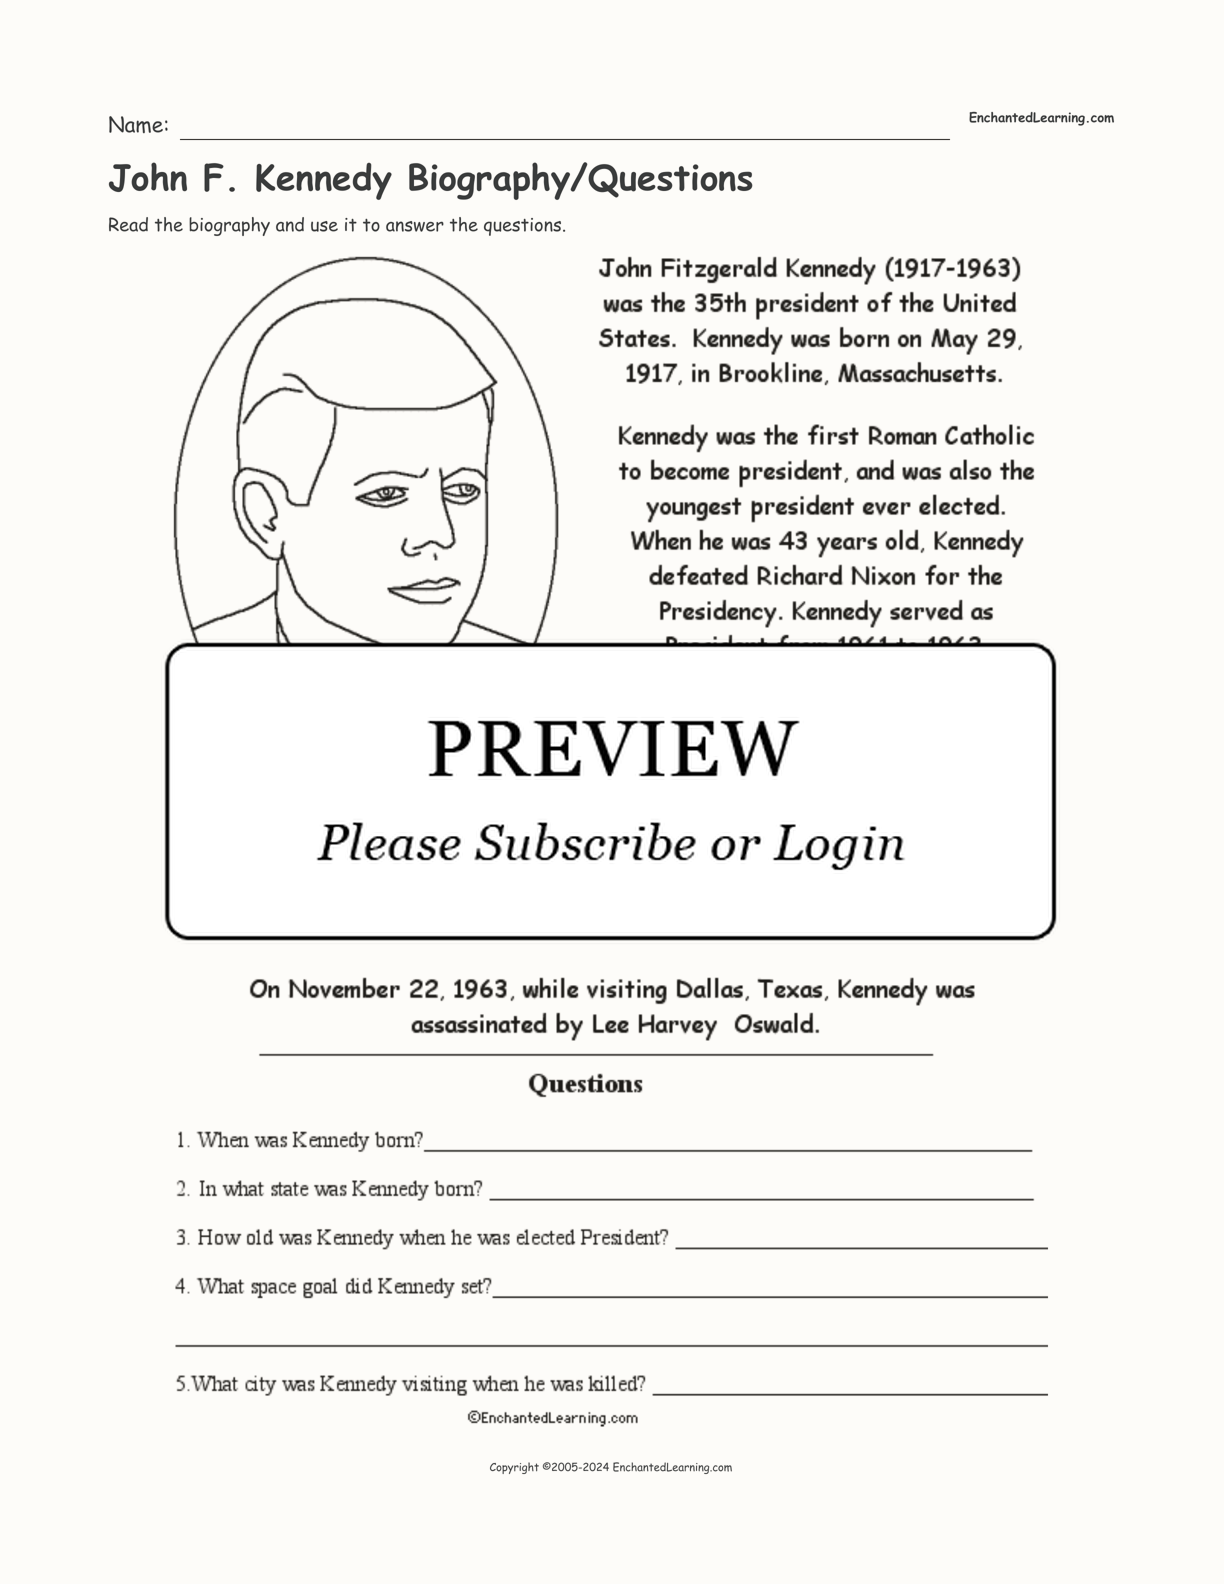 John F. Kennedy Biography/Questions interactive worksheet page 1